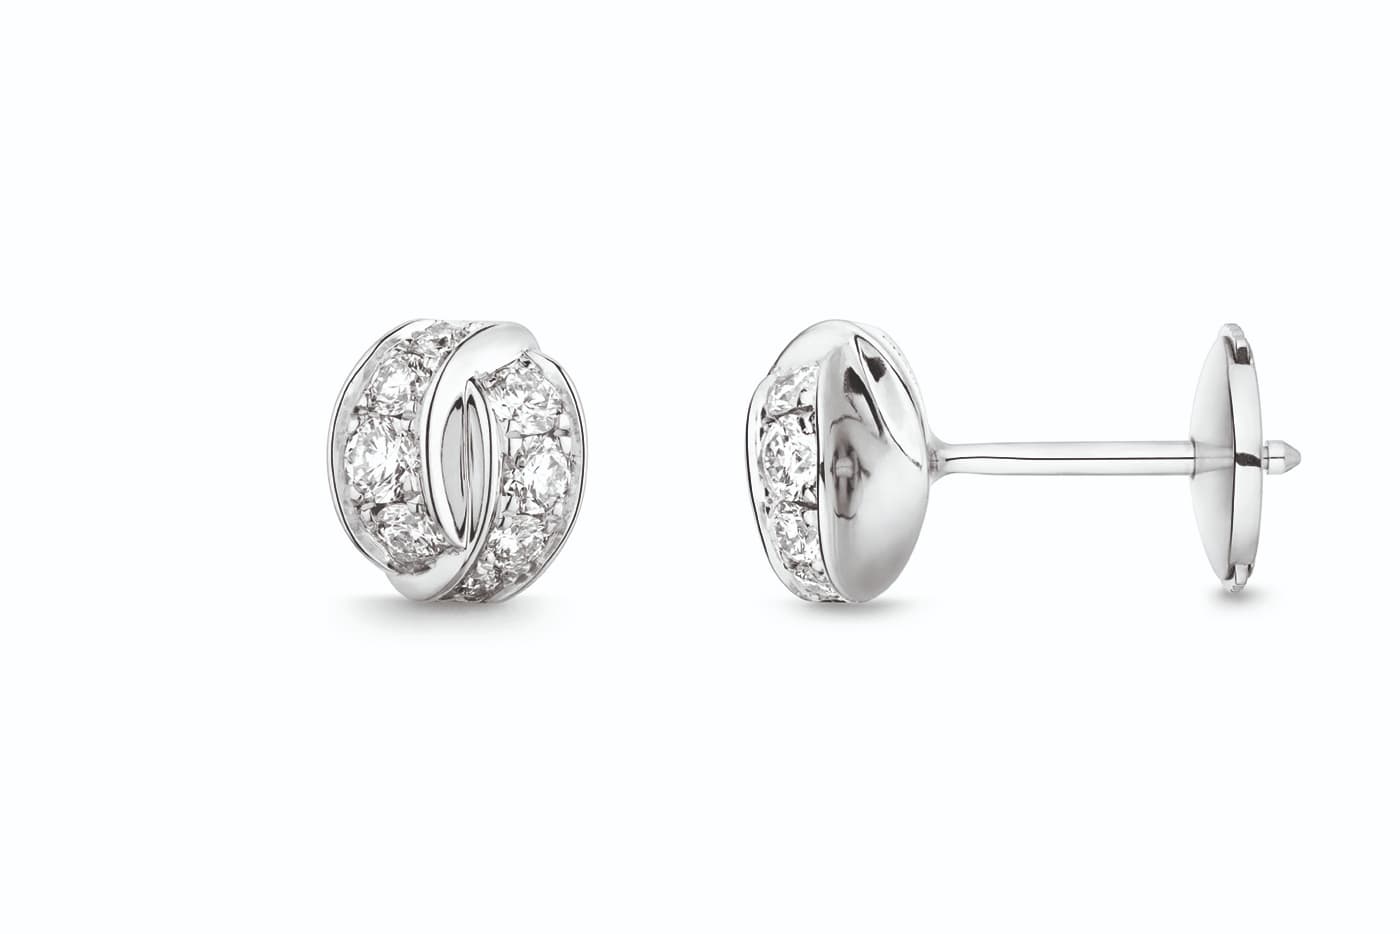 Know Your Ear Jewels: 8 Most Popular Types of Earrings